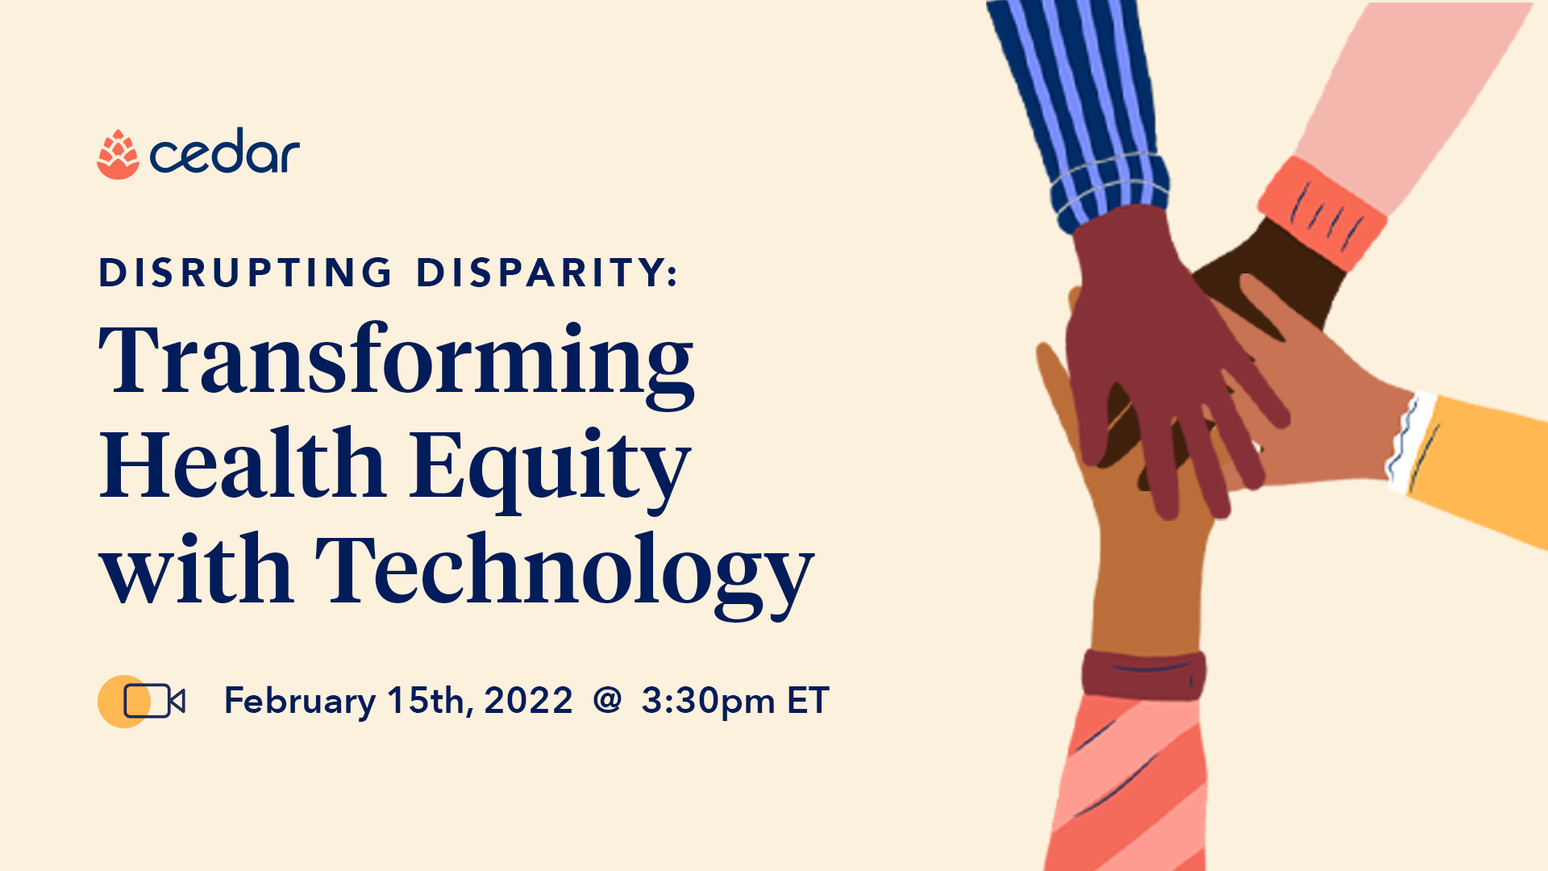 Disrupting disparity: Transforming health equity with technology